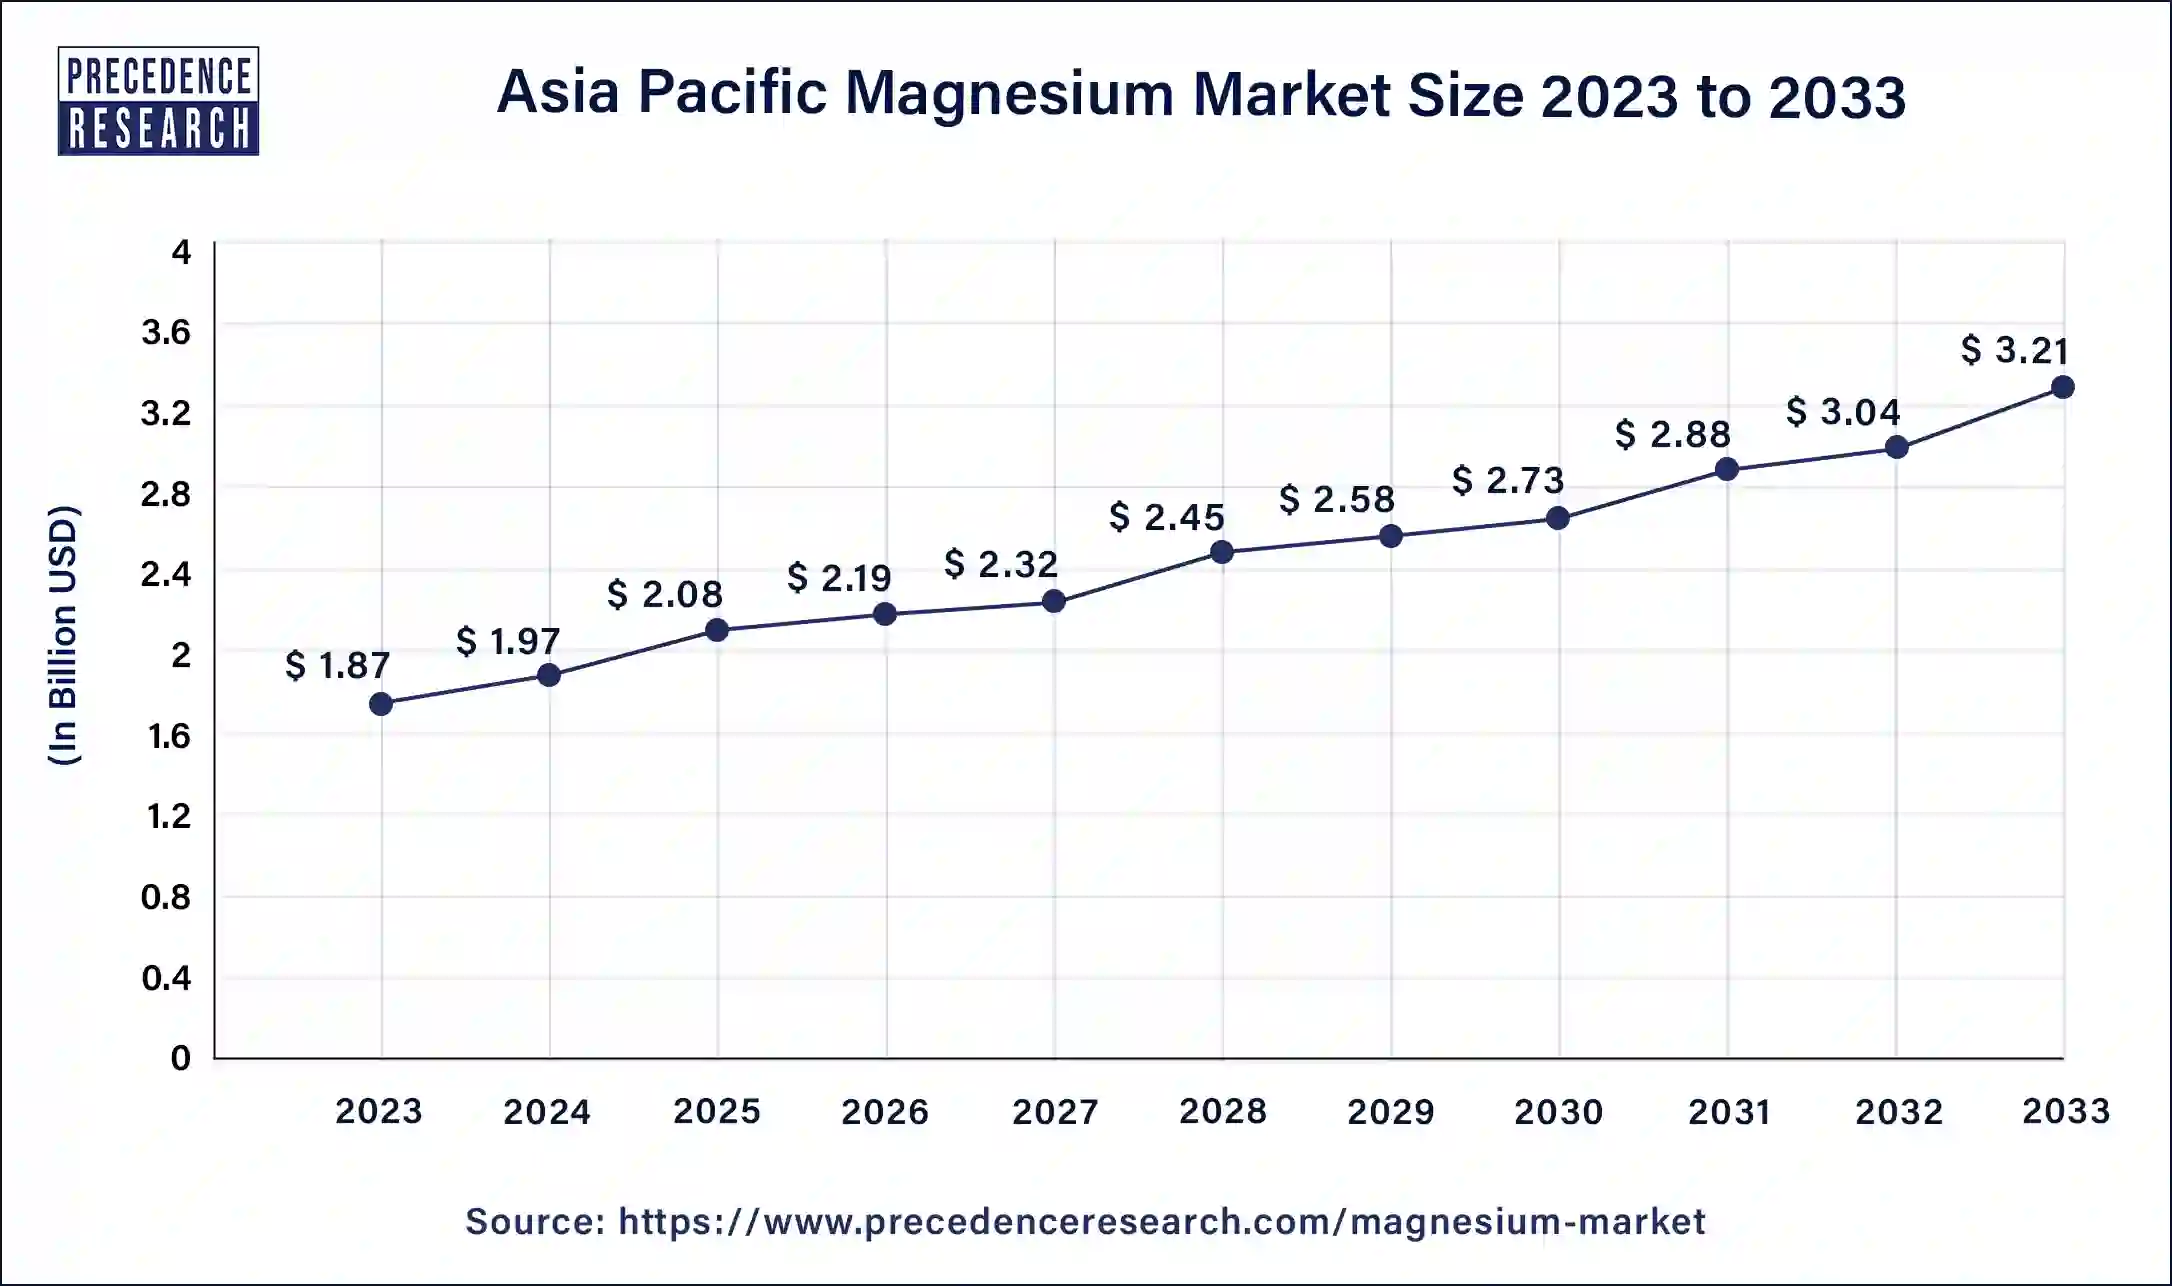 Asia Pacific Magnesium Market Size 2024 to 2033